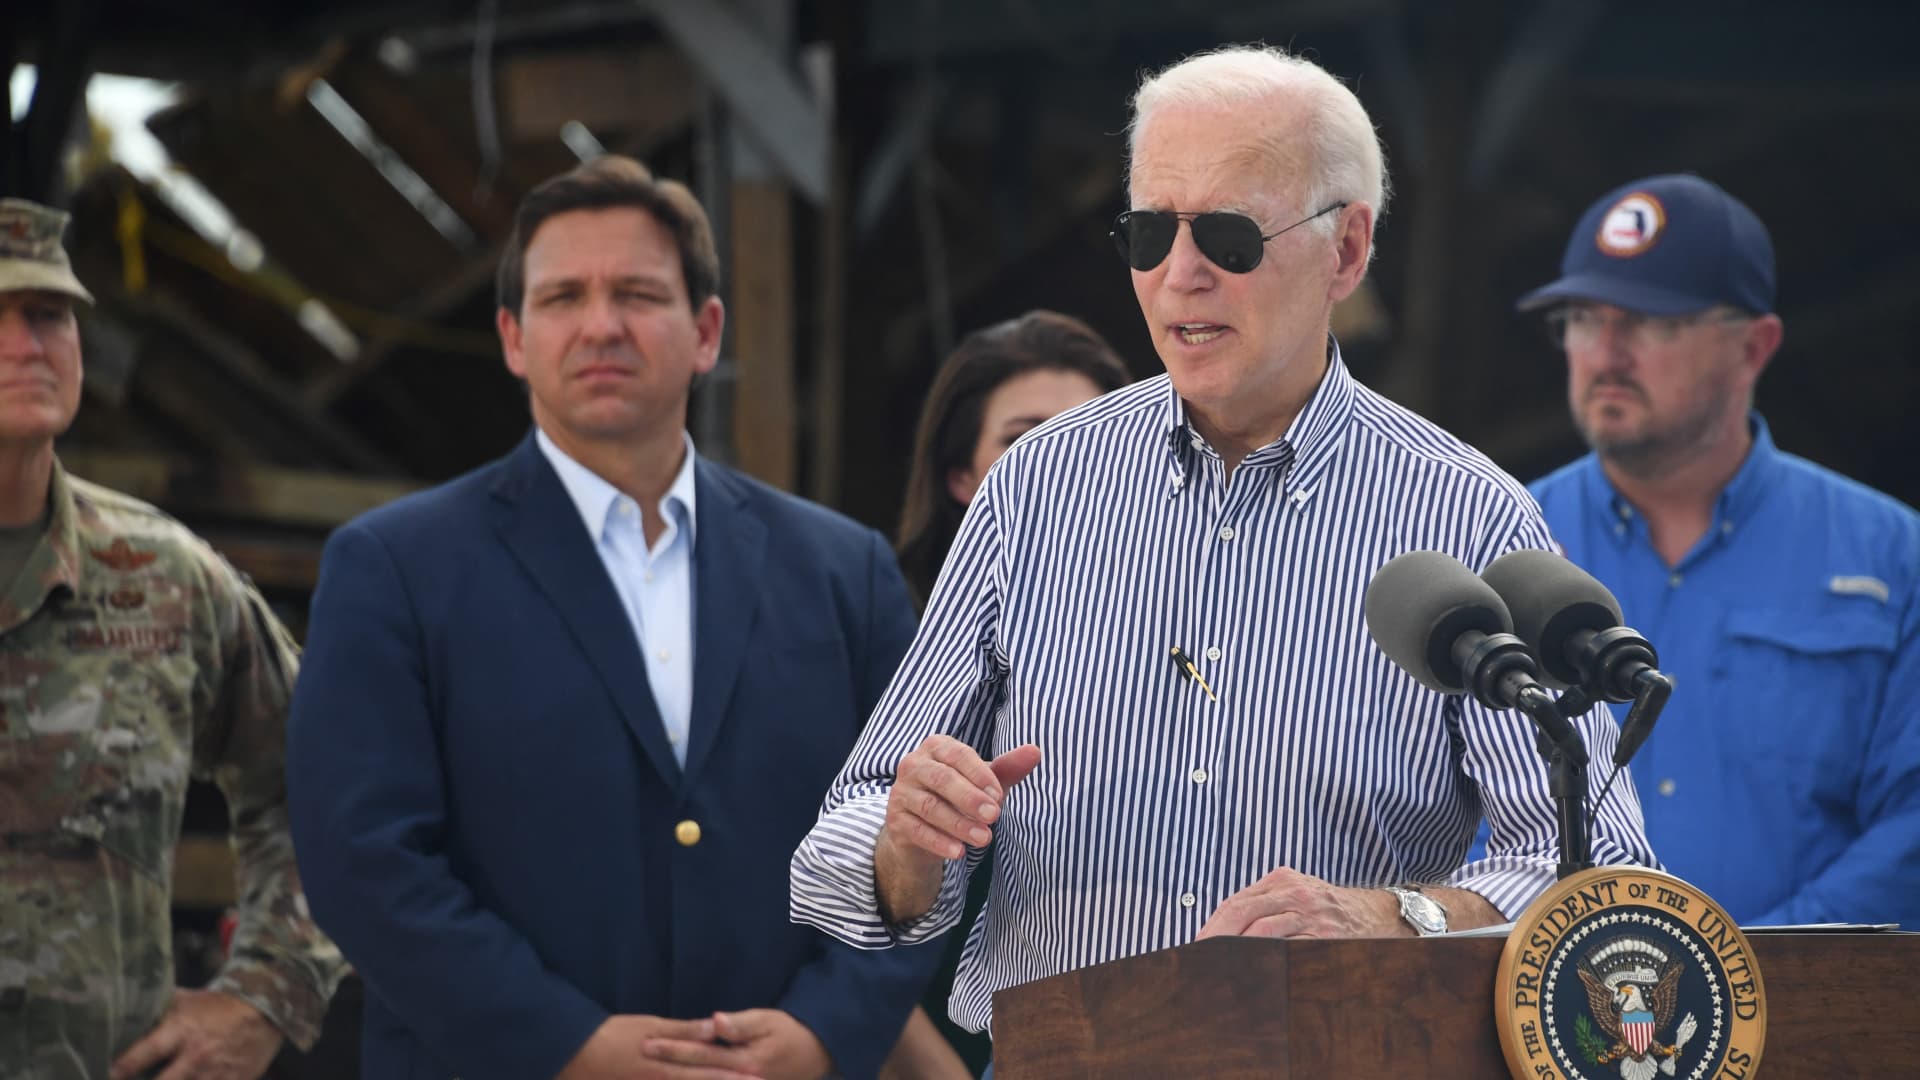 US President Joe Biden speaks in a neighborhood impacted by Hurricane Ian at Fishermans Pass in Fort Myers, Florida, on October 5, 2022 as Florida Governor Ron DeSantis looks on.